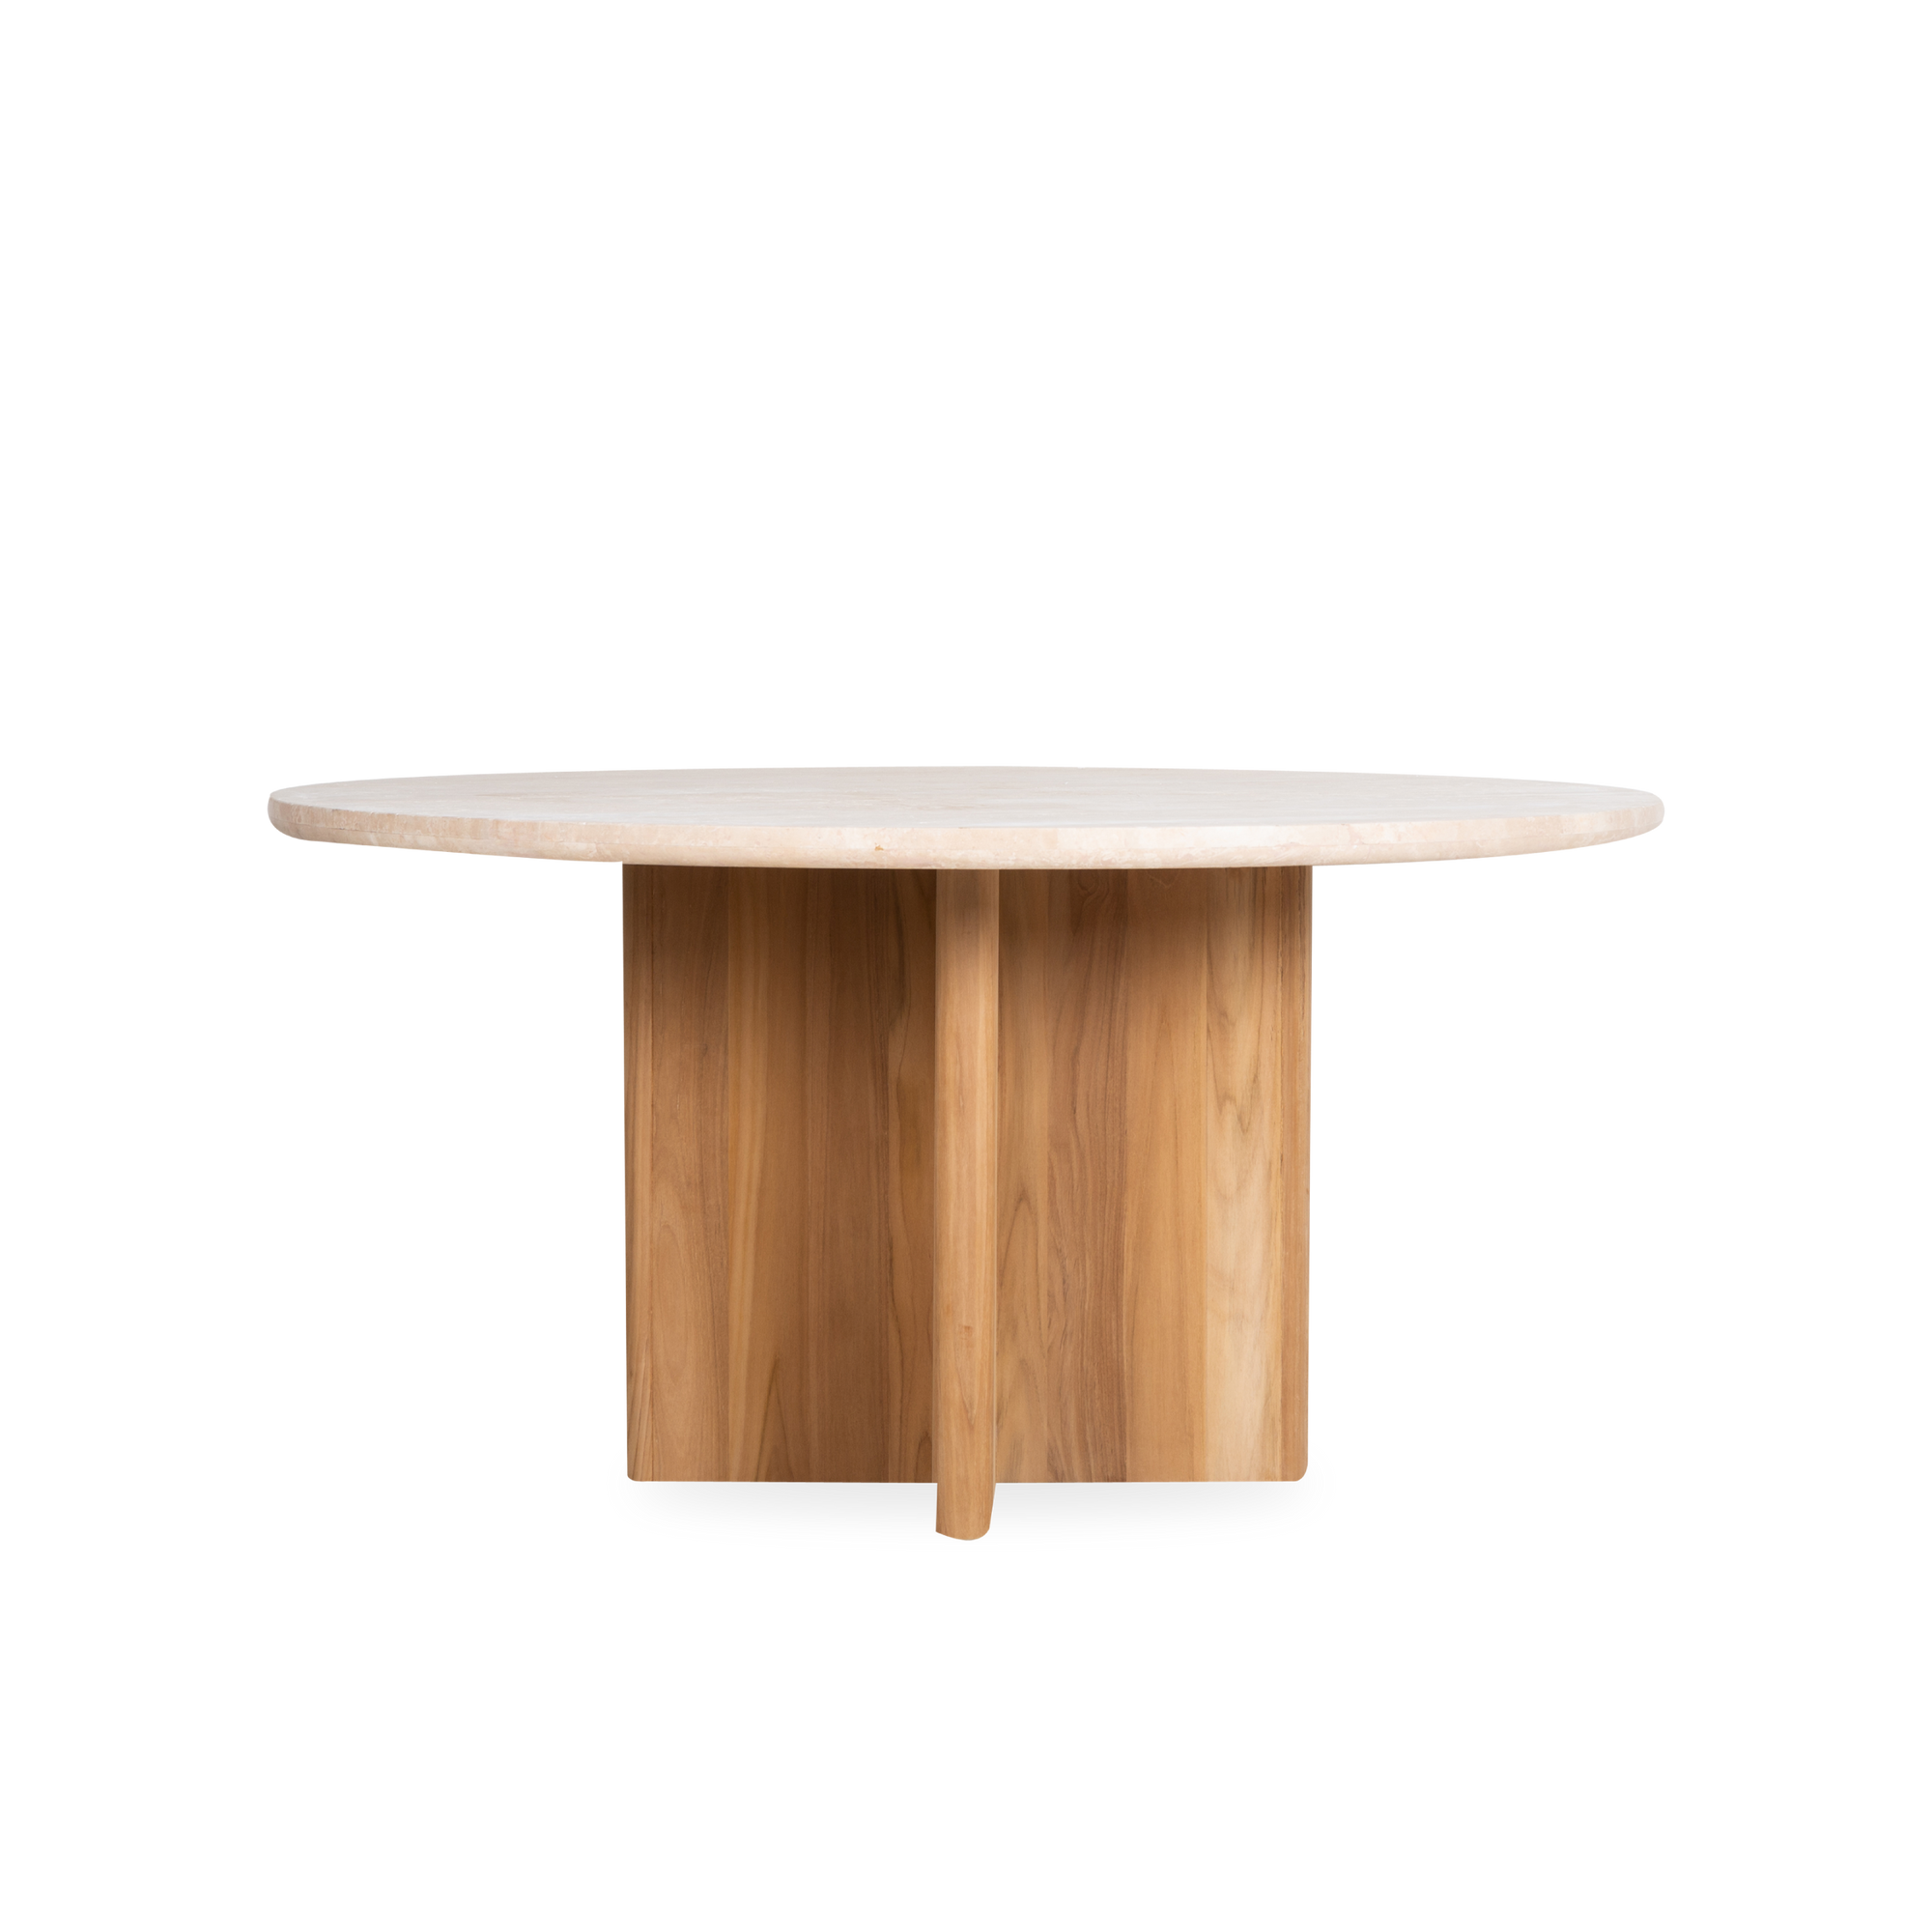 Balancing sculptural curves and right angles for true simplicity of proportion, the Victoria Teak Dining Table elevates outdoor dining.